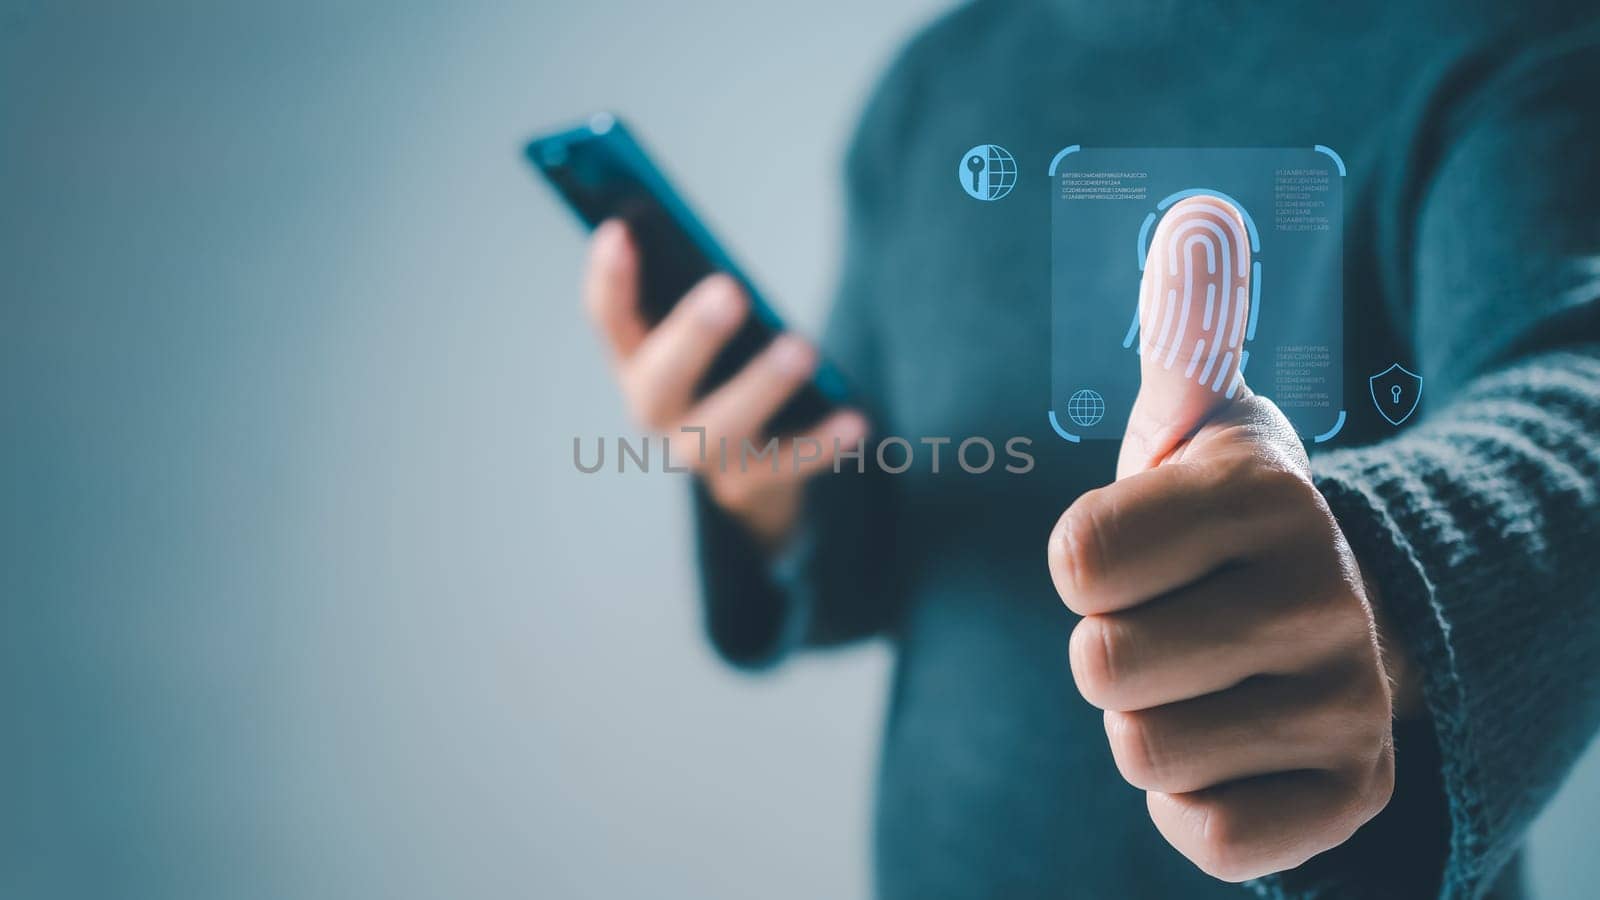 Businessman scan fingerprint biometric identity and approval. Secure access granted by valid fingerprint scan, Business Technology Safety Internet Network Concept, Business Technology Safety Internet Network Concept. by Unimages2527